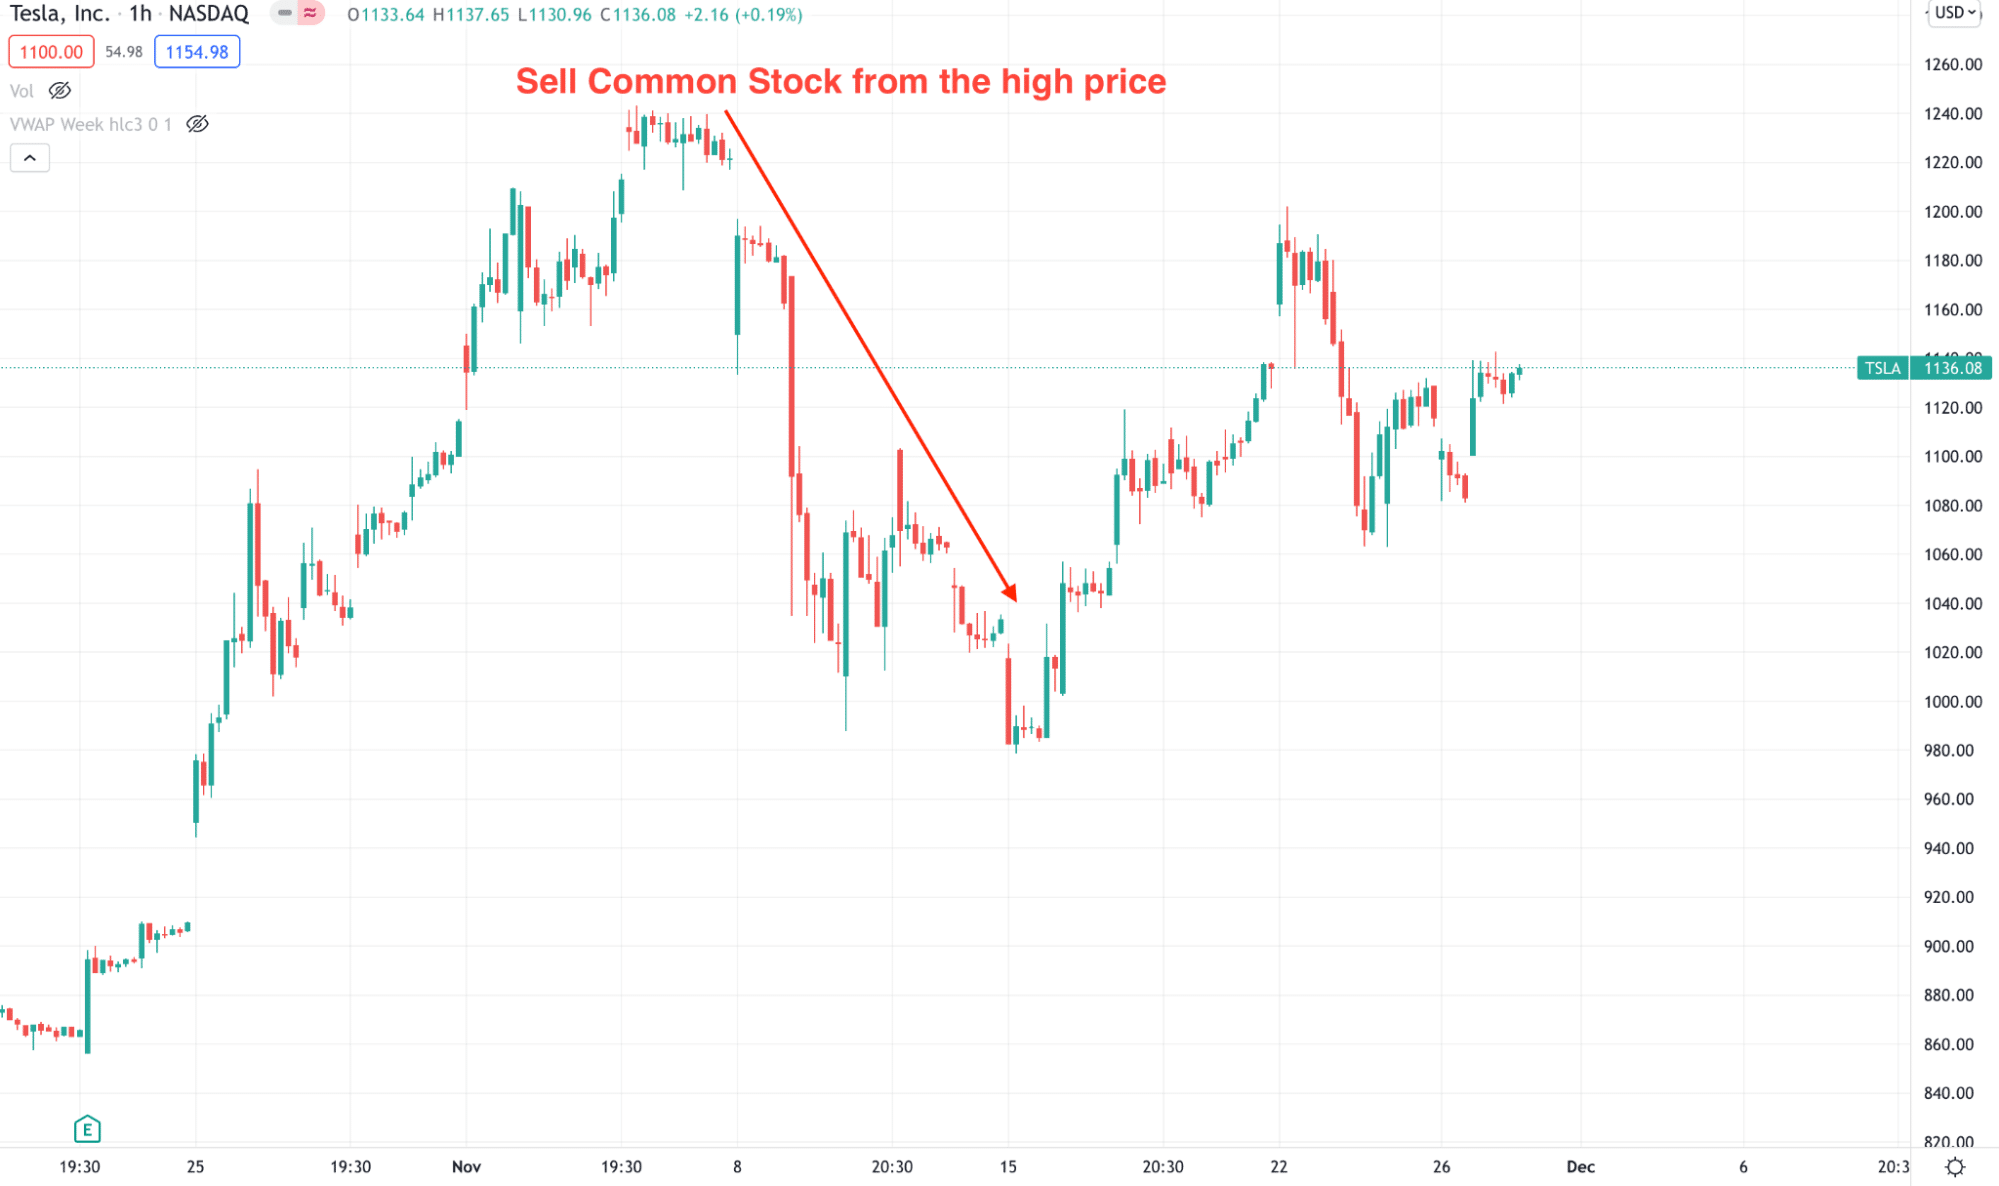 Sell common stock from the high price